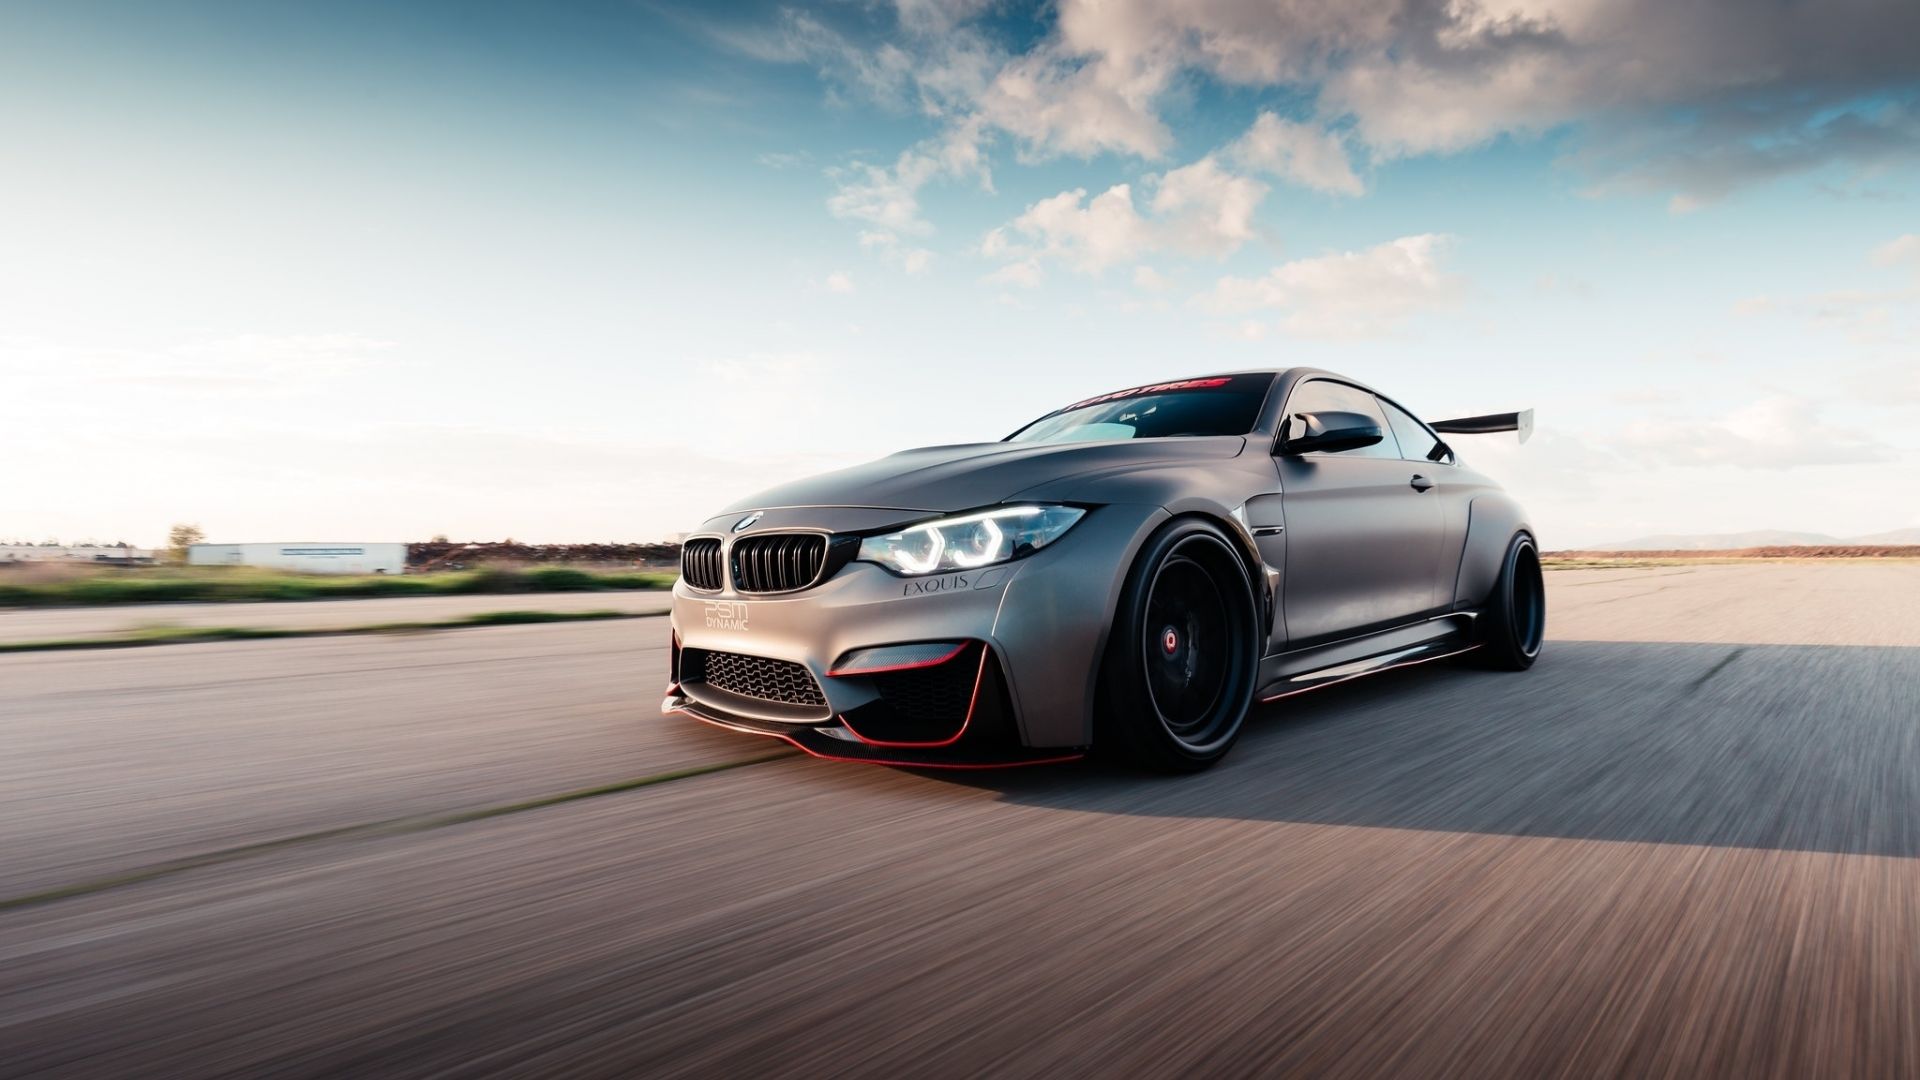 Desktop Wallpaper Bmw M On Road, Luxurious Car, HD Image, Picture, Background, 3712ad